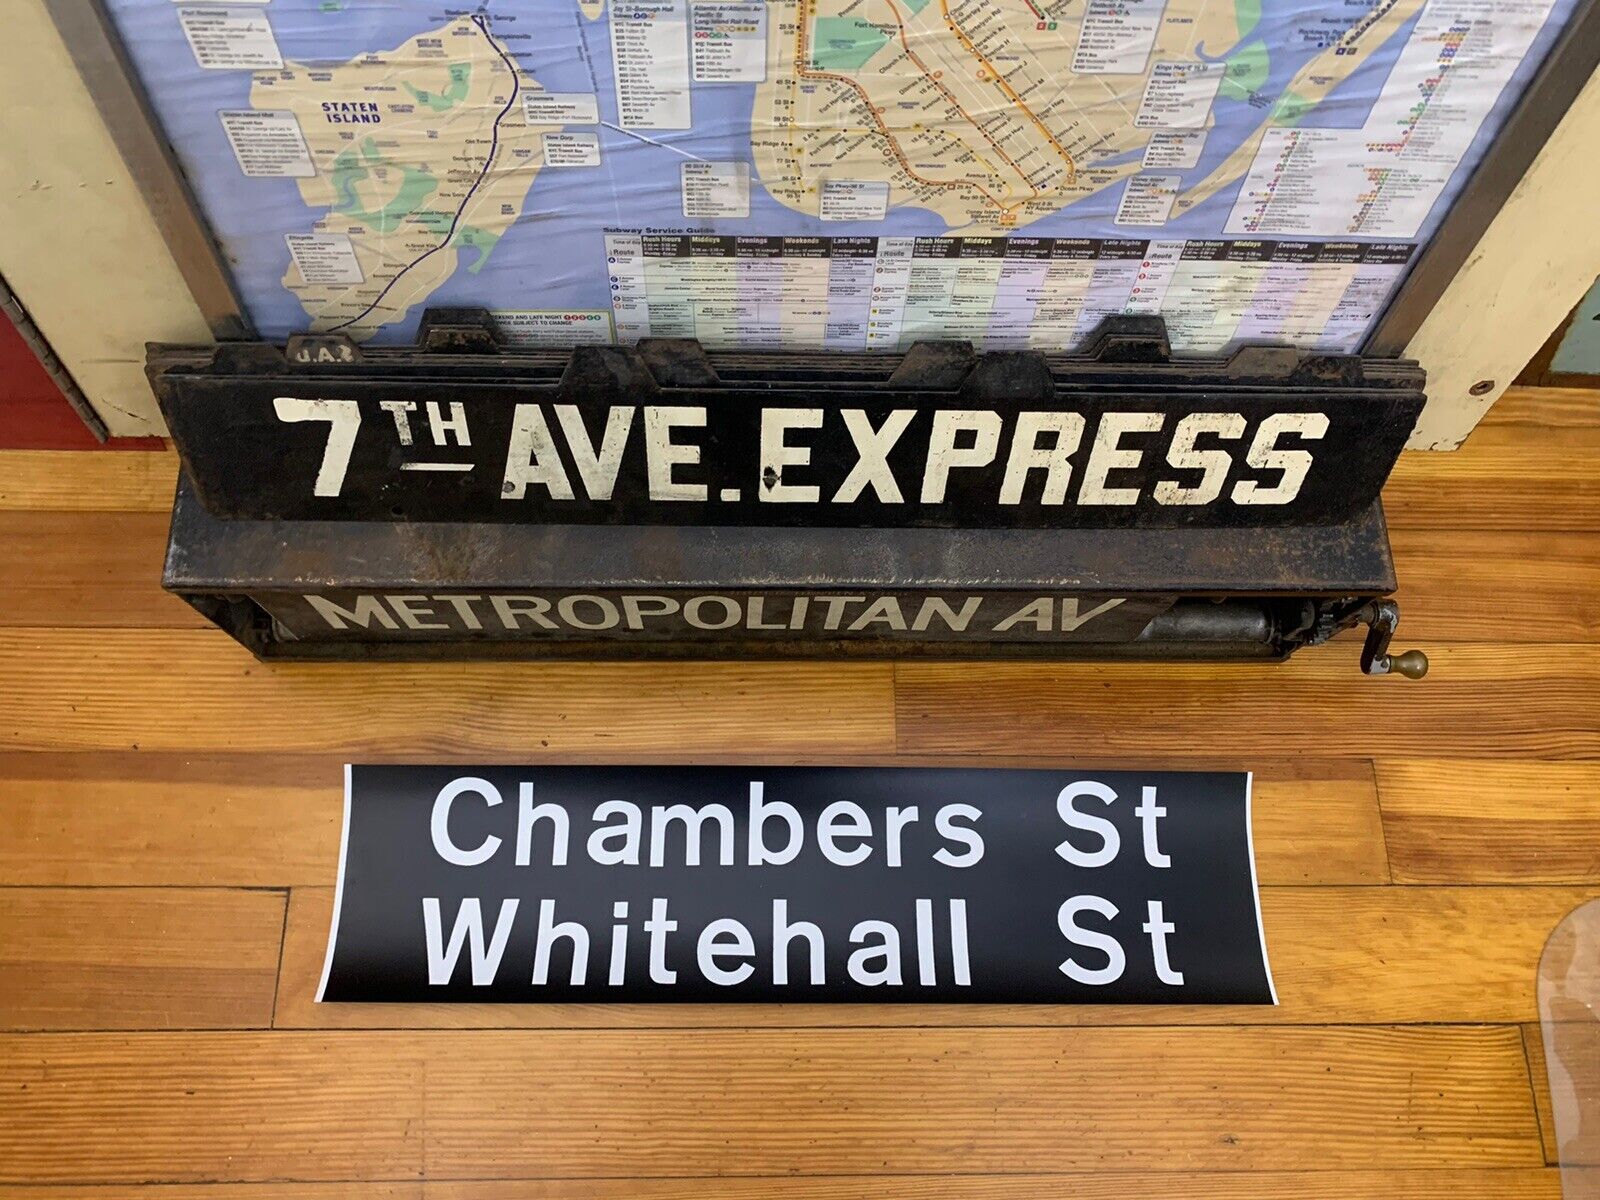 NY NYC SUBWAY ROLL SIGN R10 BMT IND WHITEHALL CHAMBERS STREET FINANCIAL DIST. 